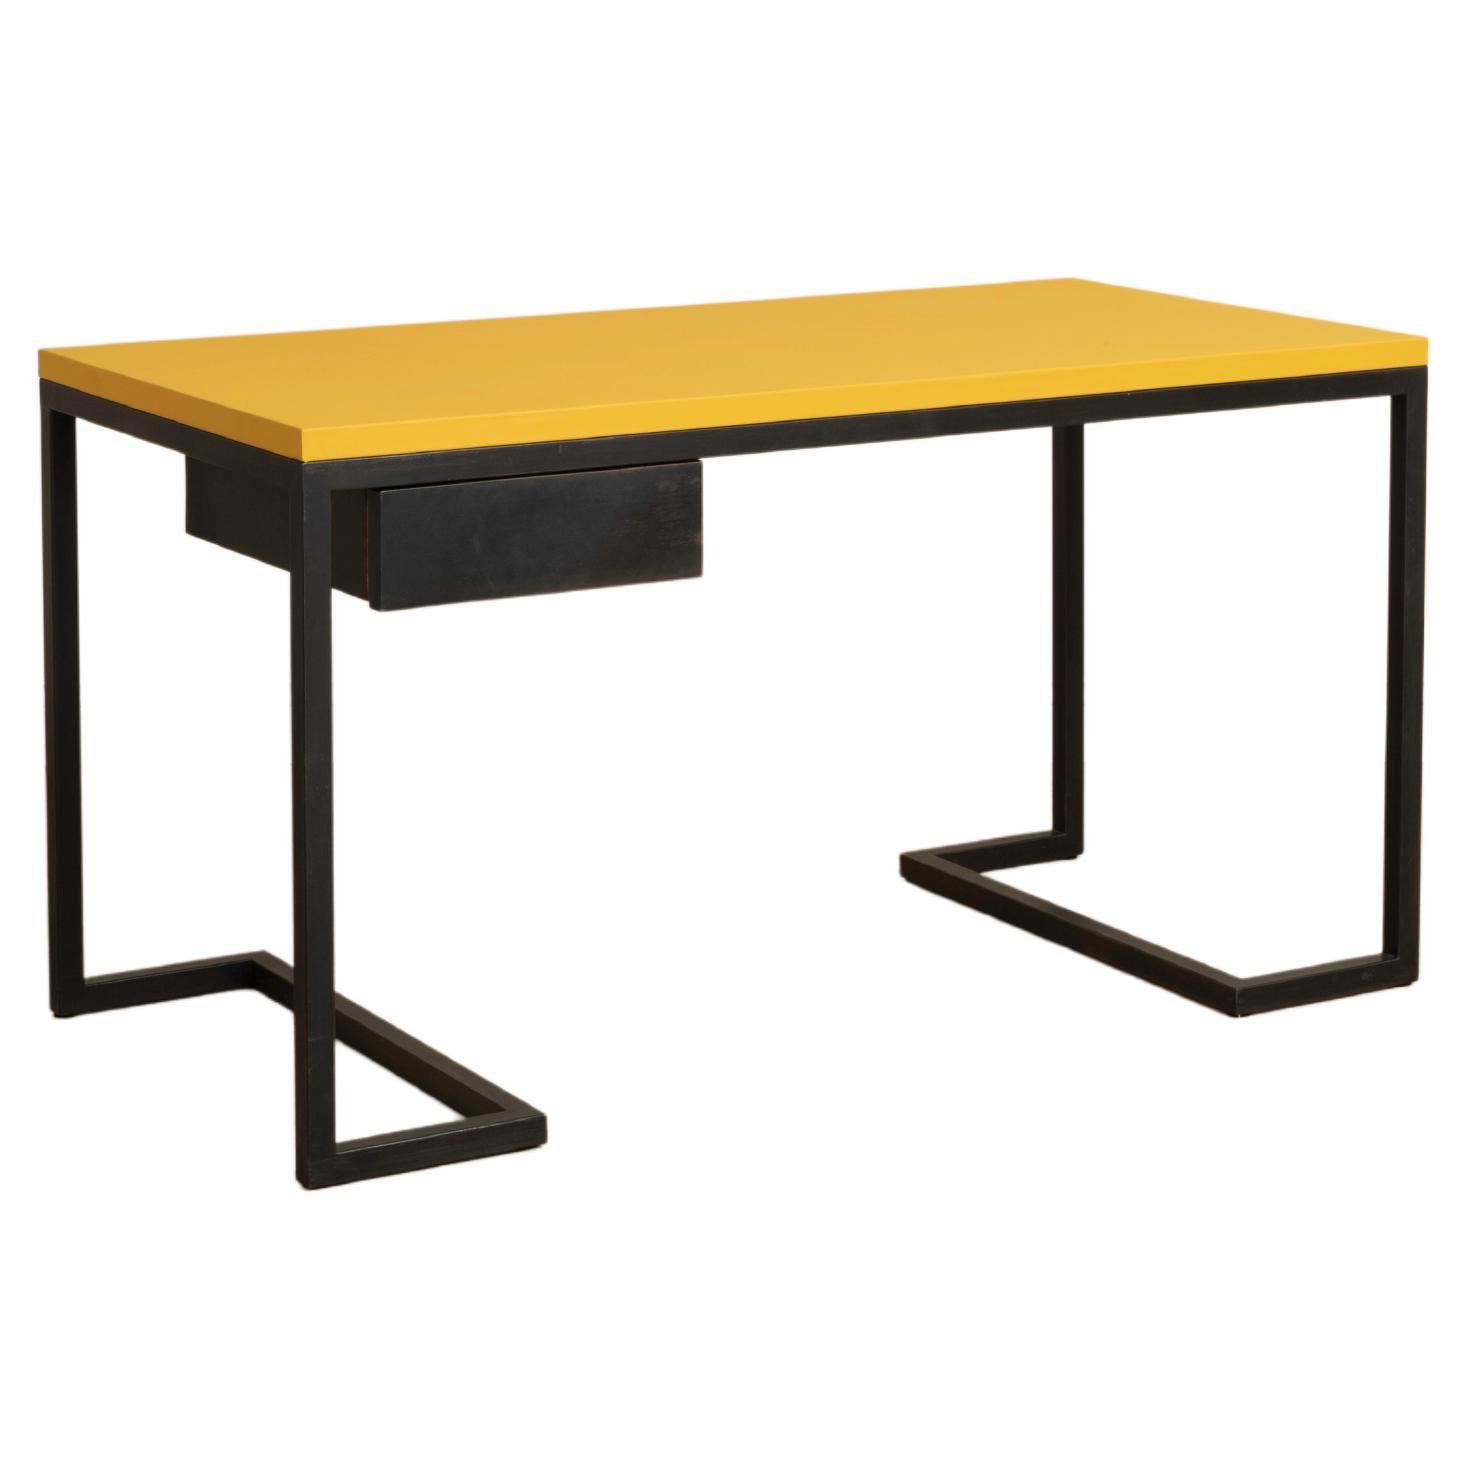 Rupert Bevan Atomic Desk (in Customer's Own Choice of Leather) For Sale